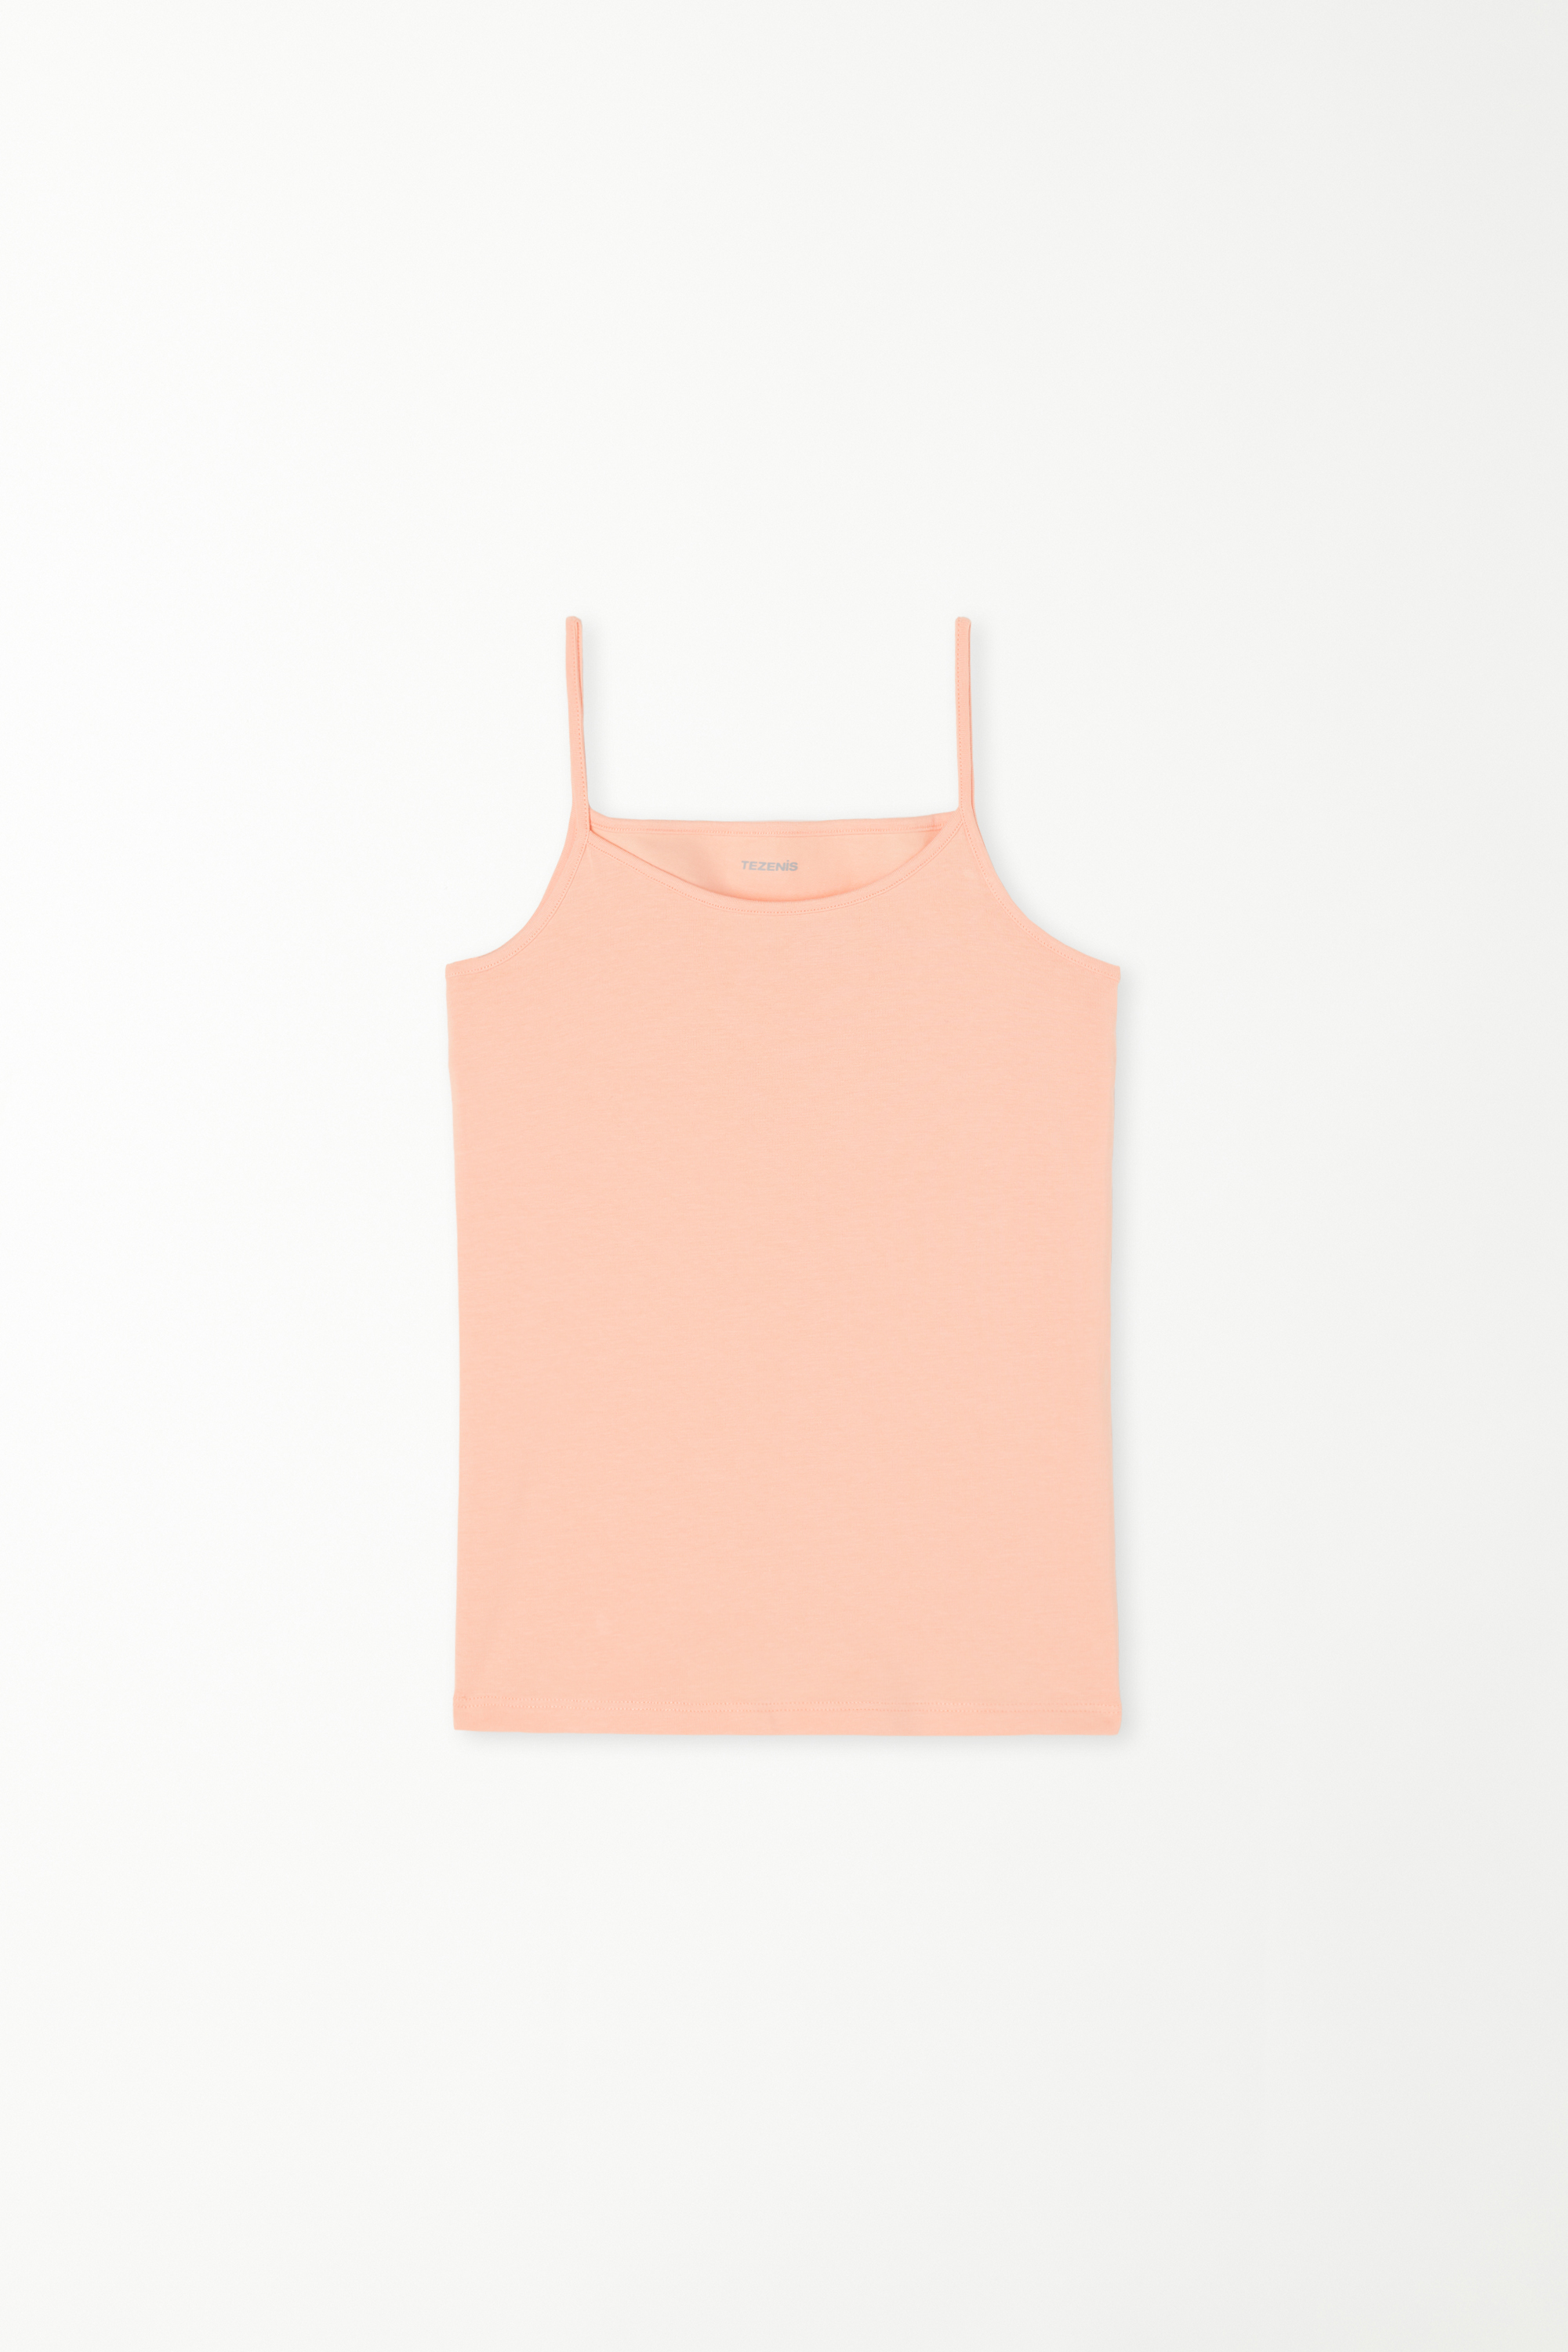 Girls’ Cotton Camisole with Thin Shoulder Straps and Rounded Neck